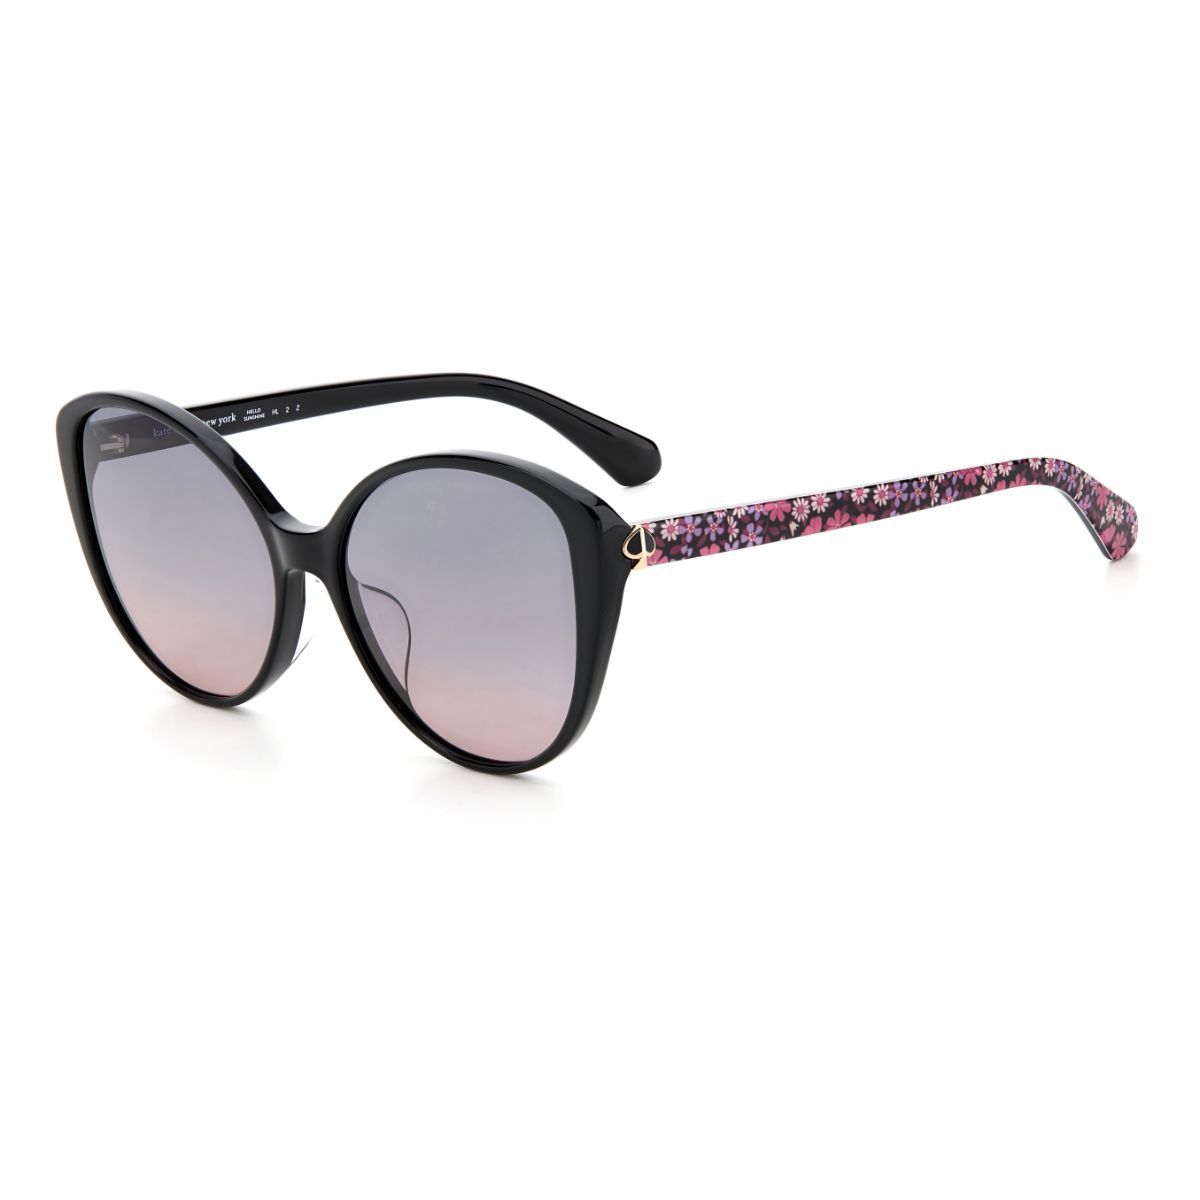 Kate Spade Purple Women Oval Sunglasses With Polarised And Uv Protected  Lens Ksp Everly/f/s 807: Buy Kate Spade Purple Women Oval Sunglasses With  Polarised And Uv Protected Lens Ksp Everly/f/s 807 Online